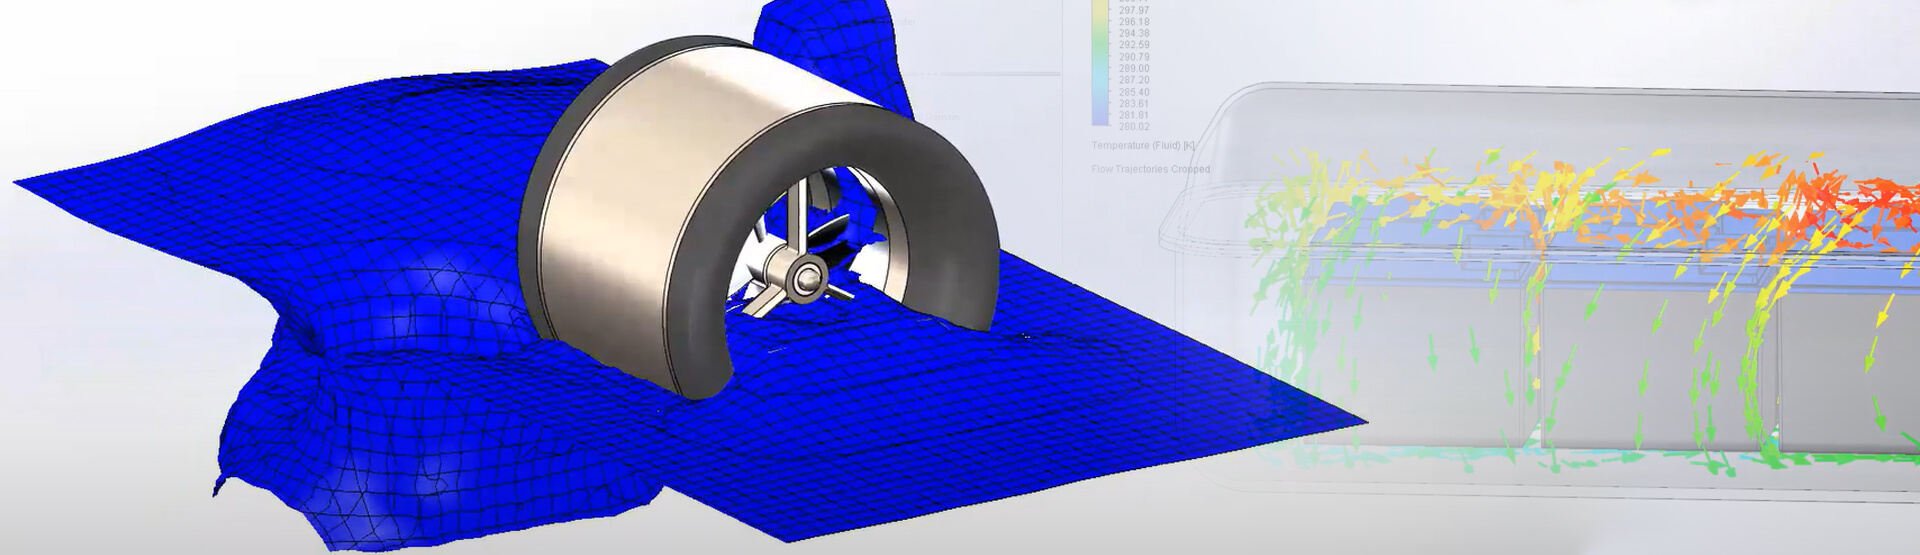 Rotating Components - 2021 - SOLIDWORKS Help